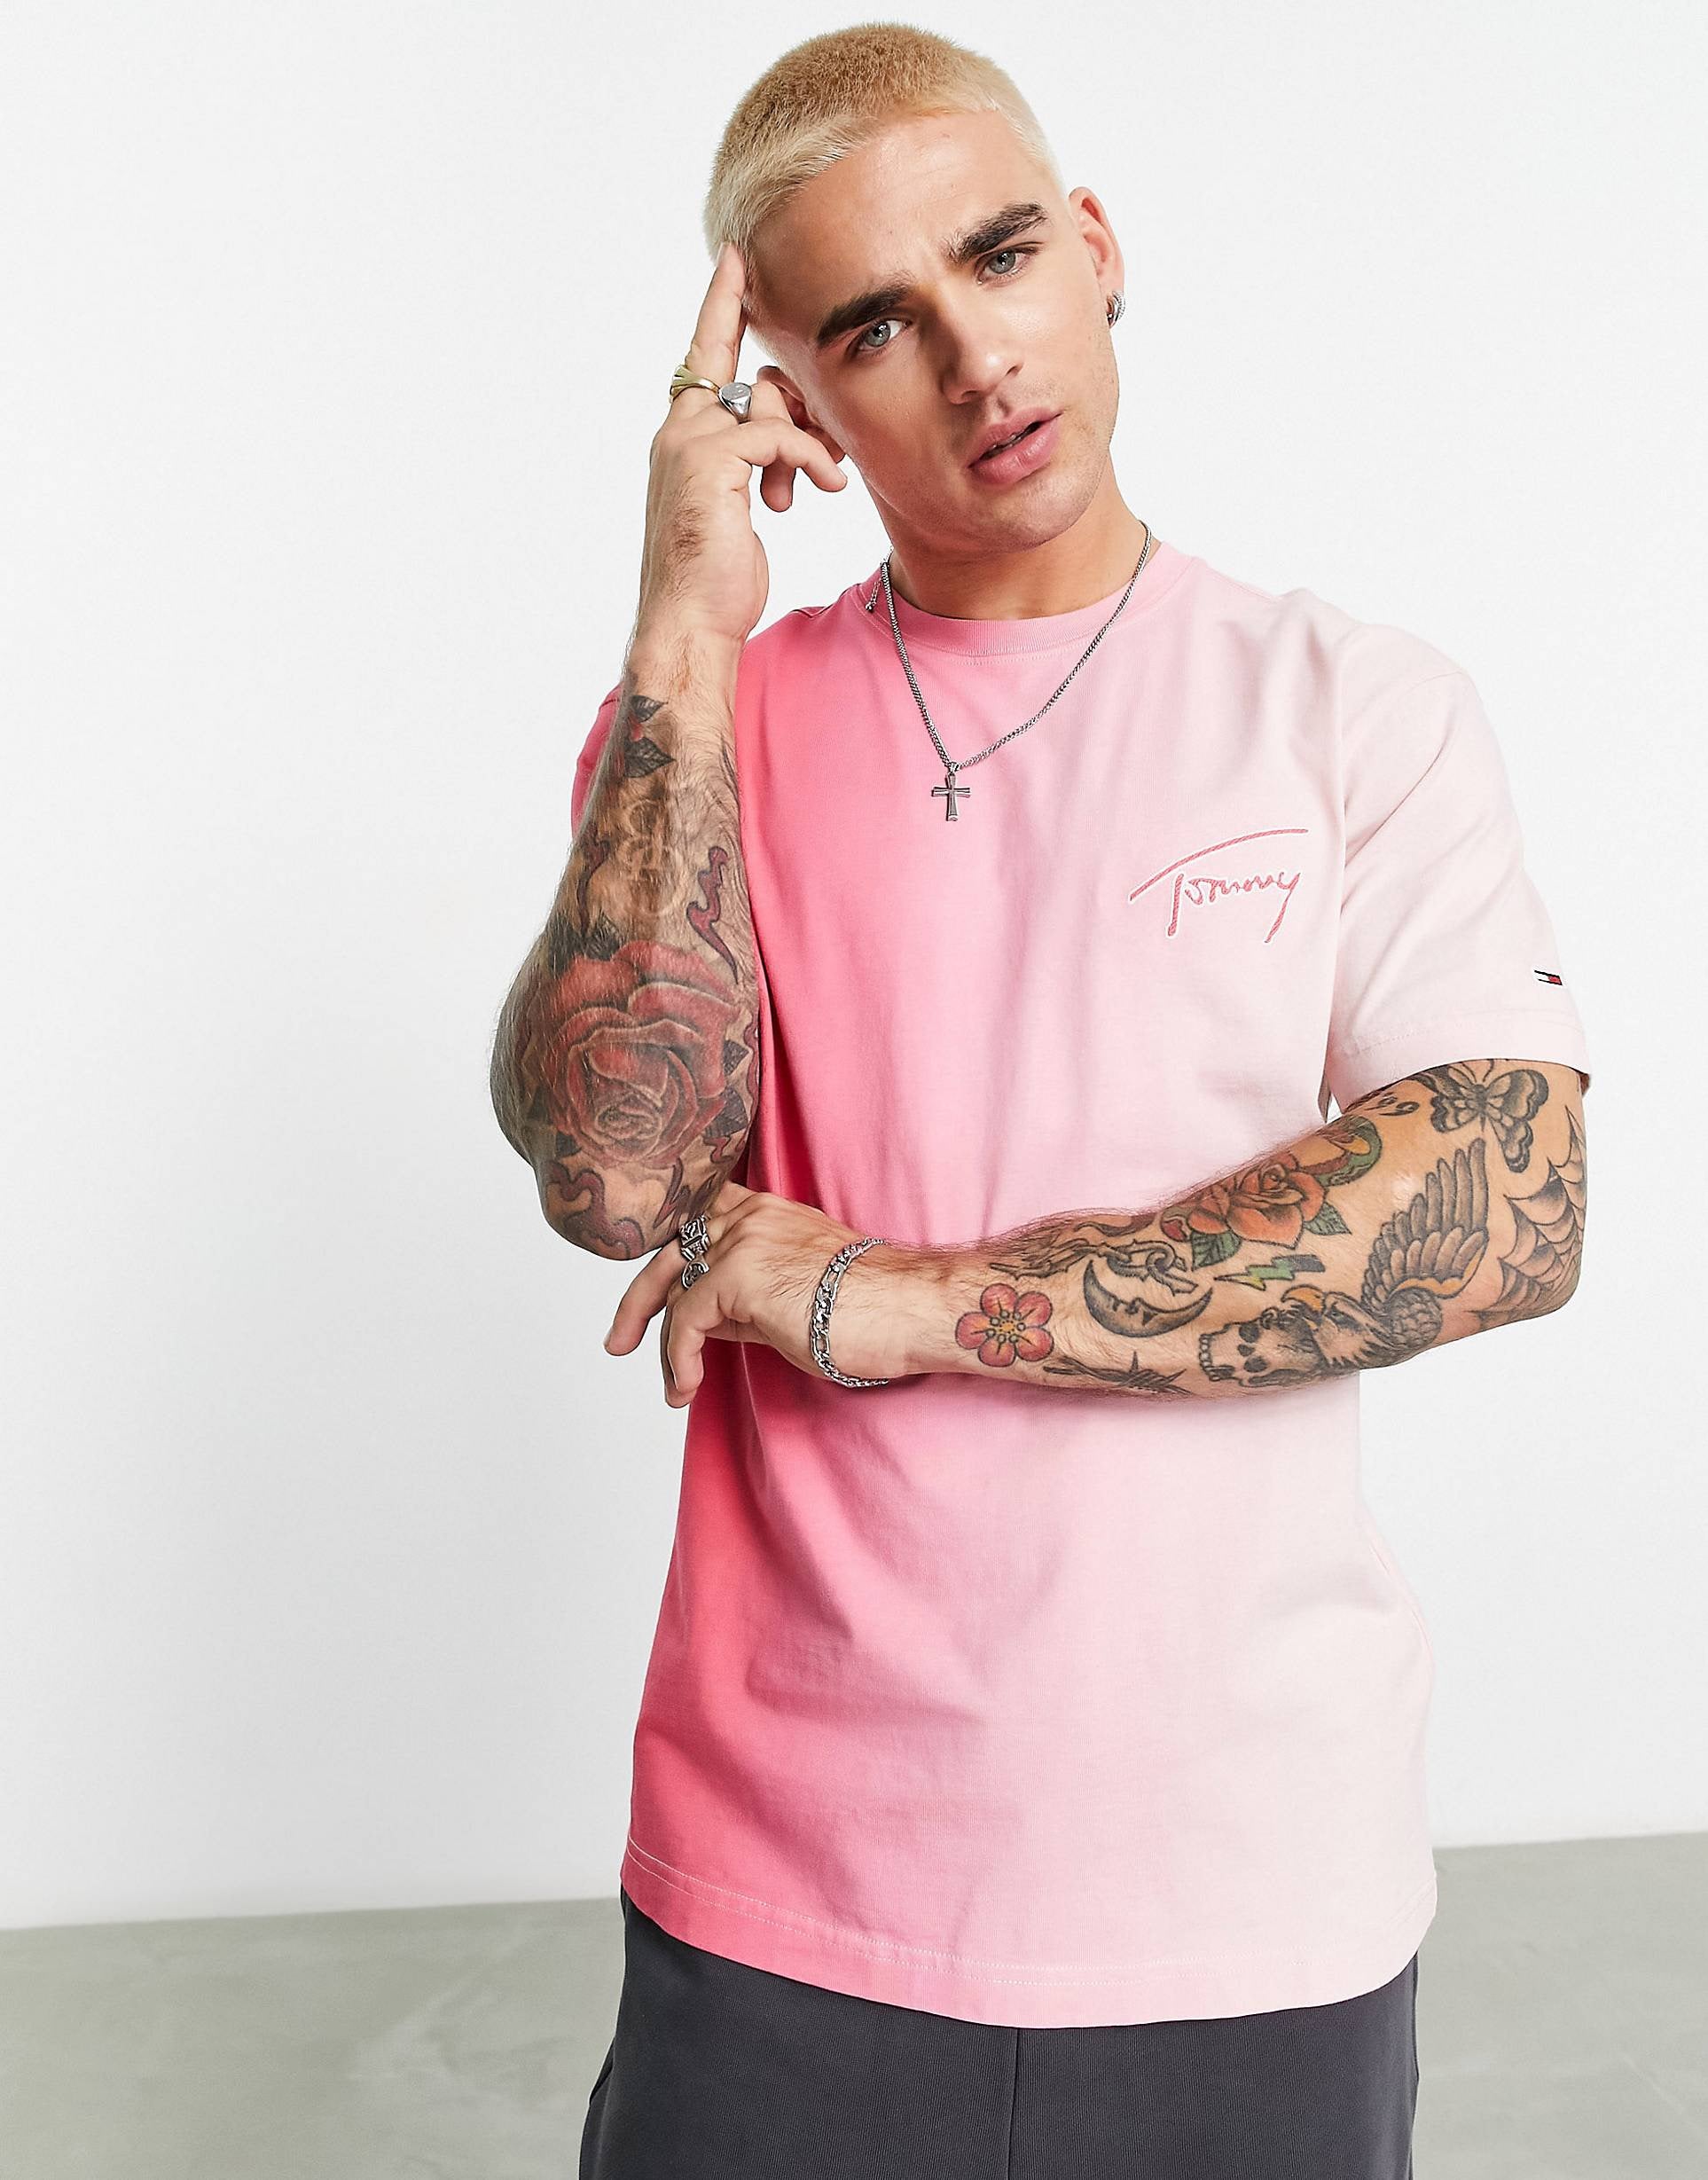 – ombre t-shirt logo Tommy Jeans n\'shpishop pink signature